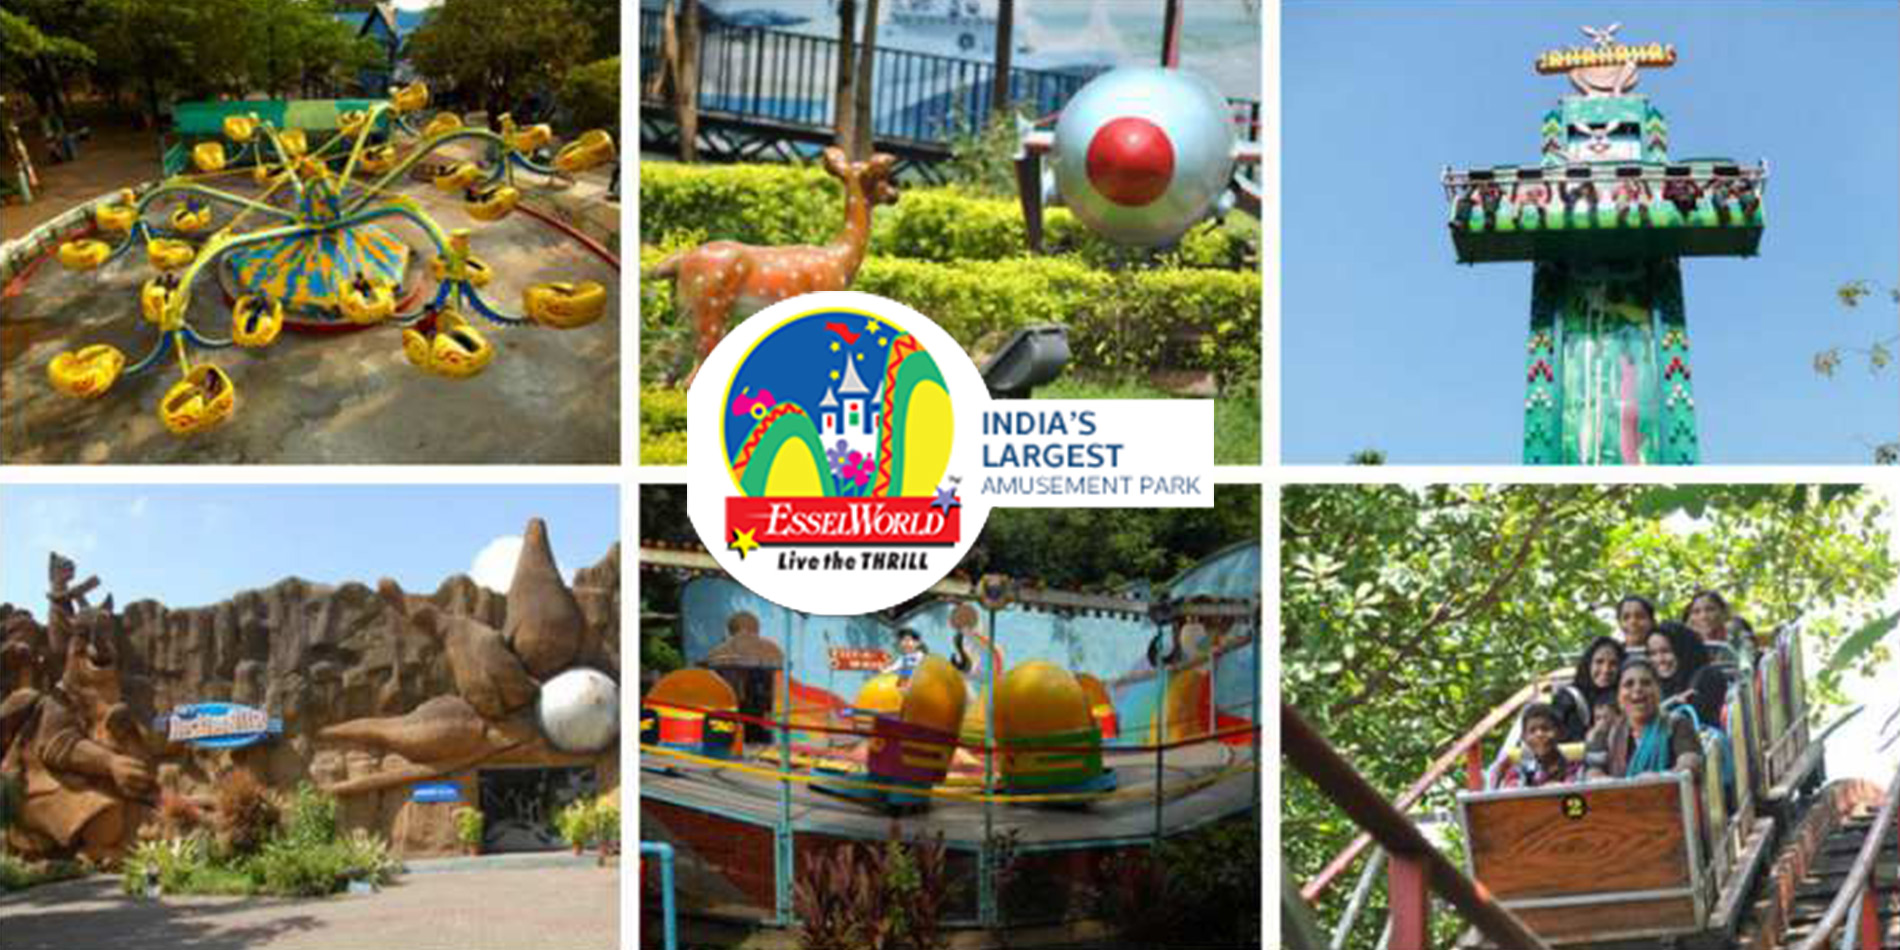 Where are the best water parks in India? - Quora